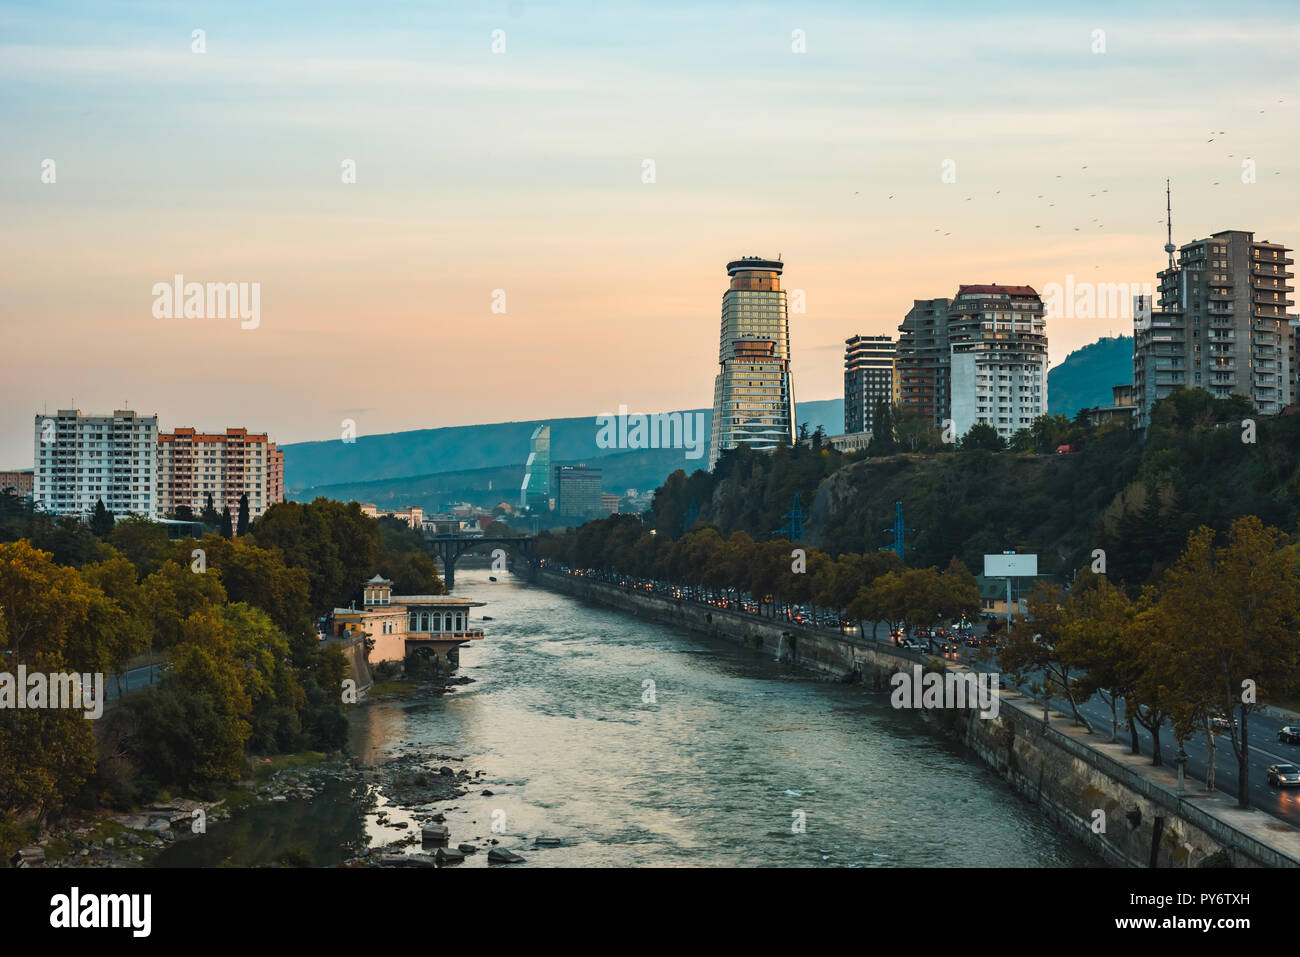 View of evening Tbilisi and the river Kura from the bridge, Georgia Stock Photo